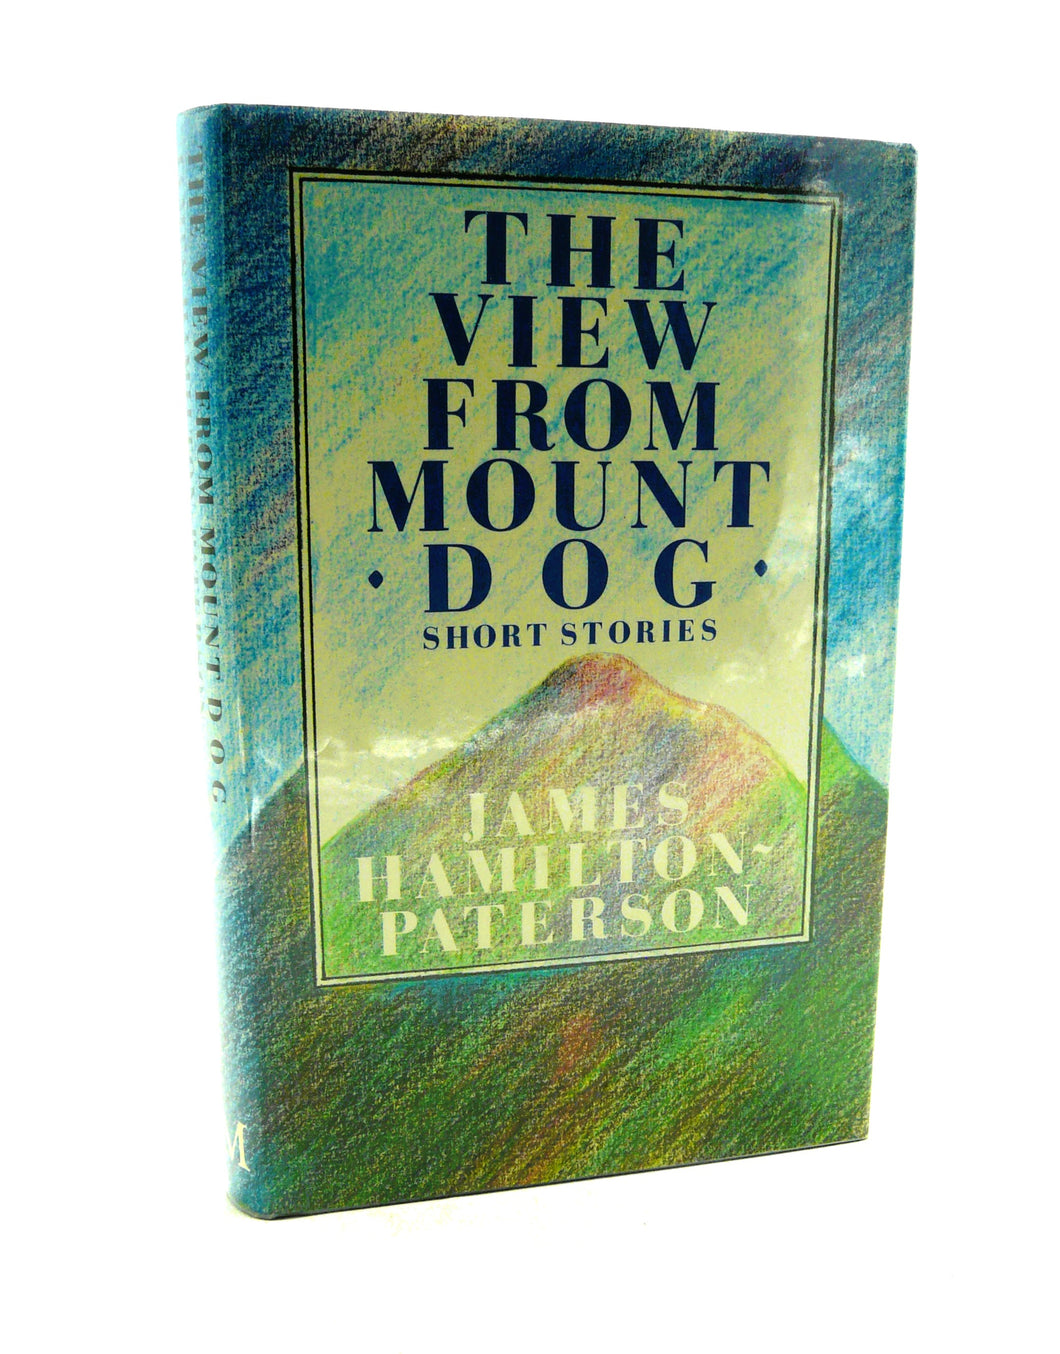 The View From Mount Dog by James Hamilton-Paterson